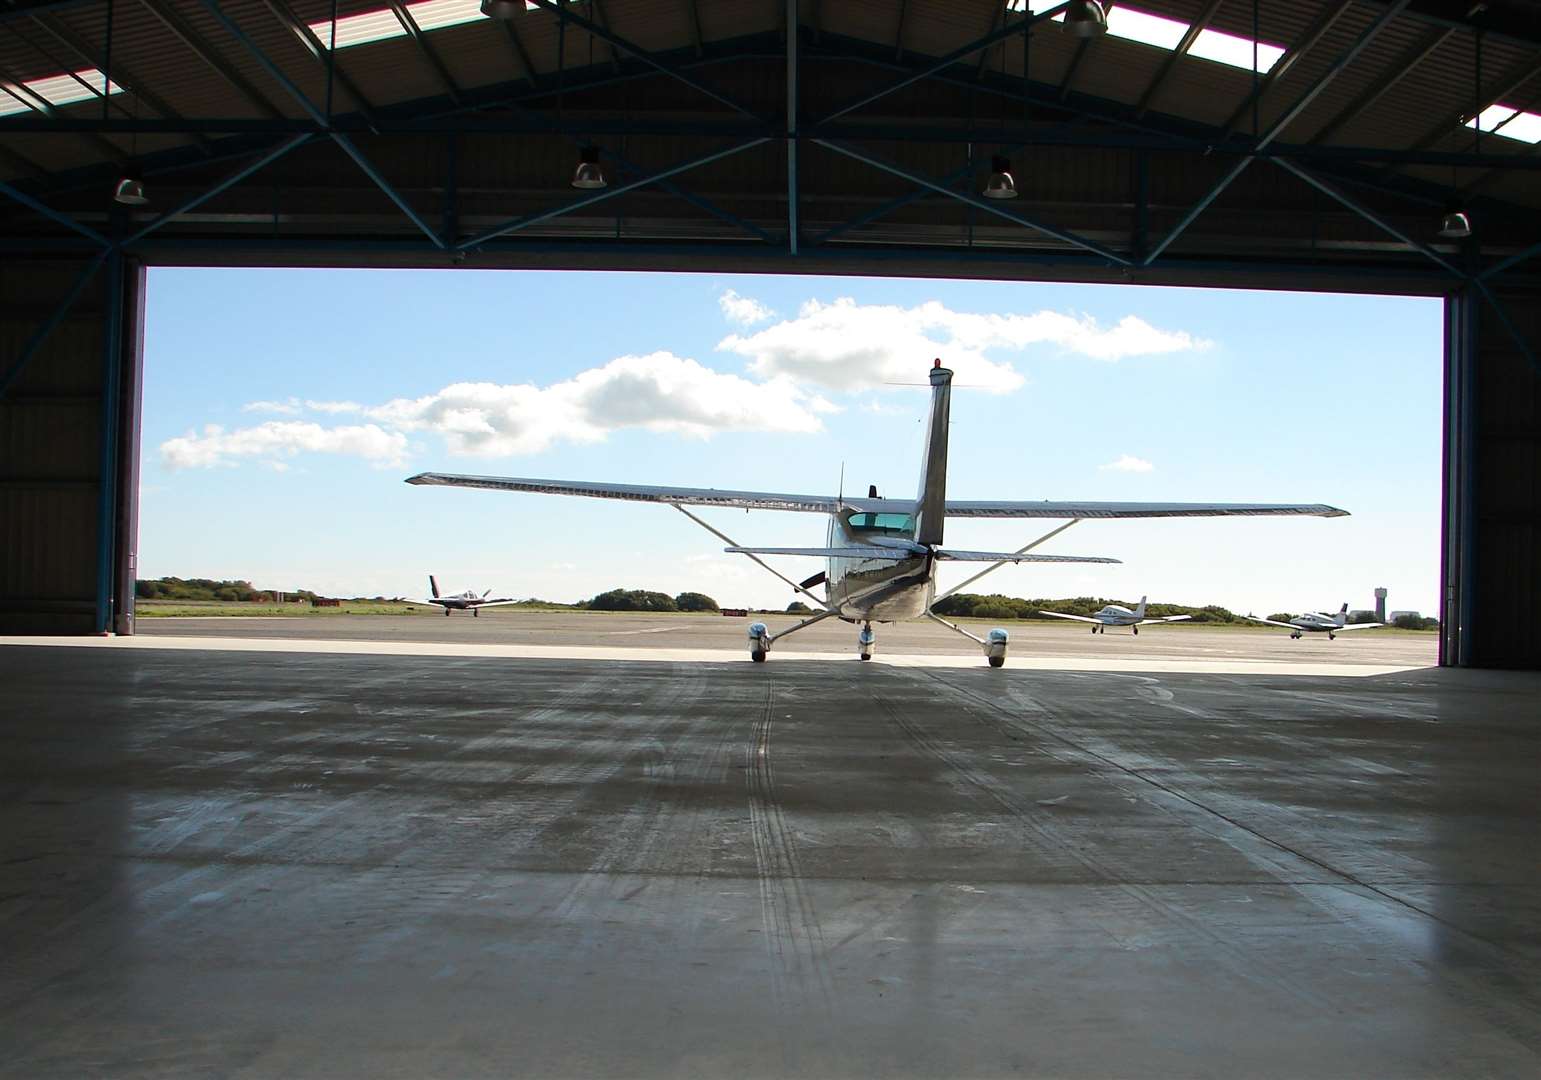 The new airport hangar in 2015